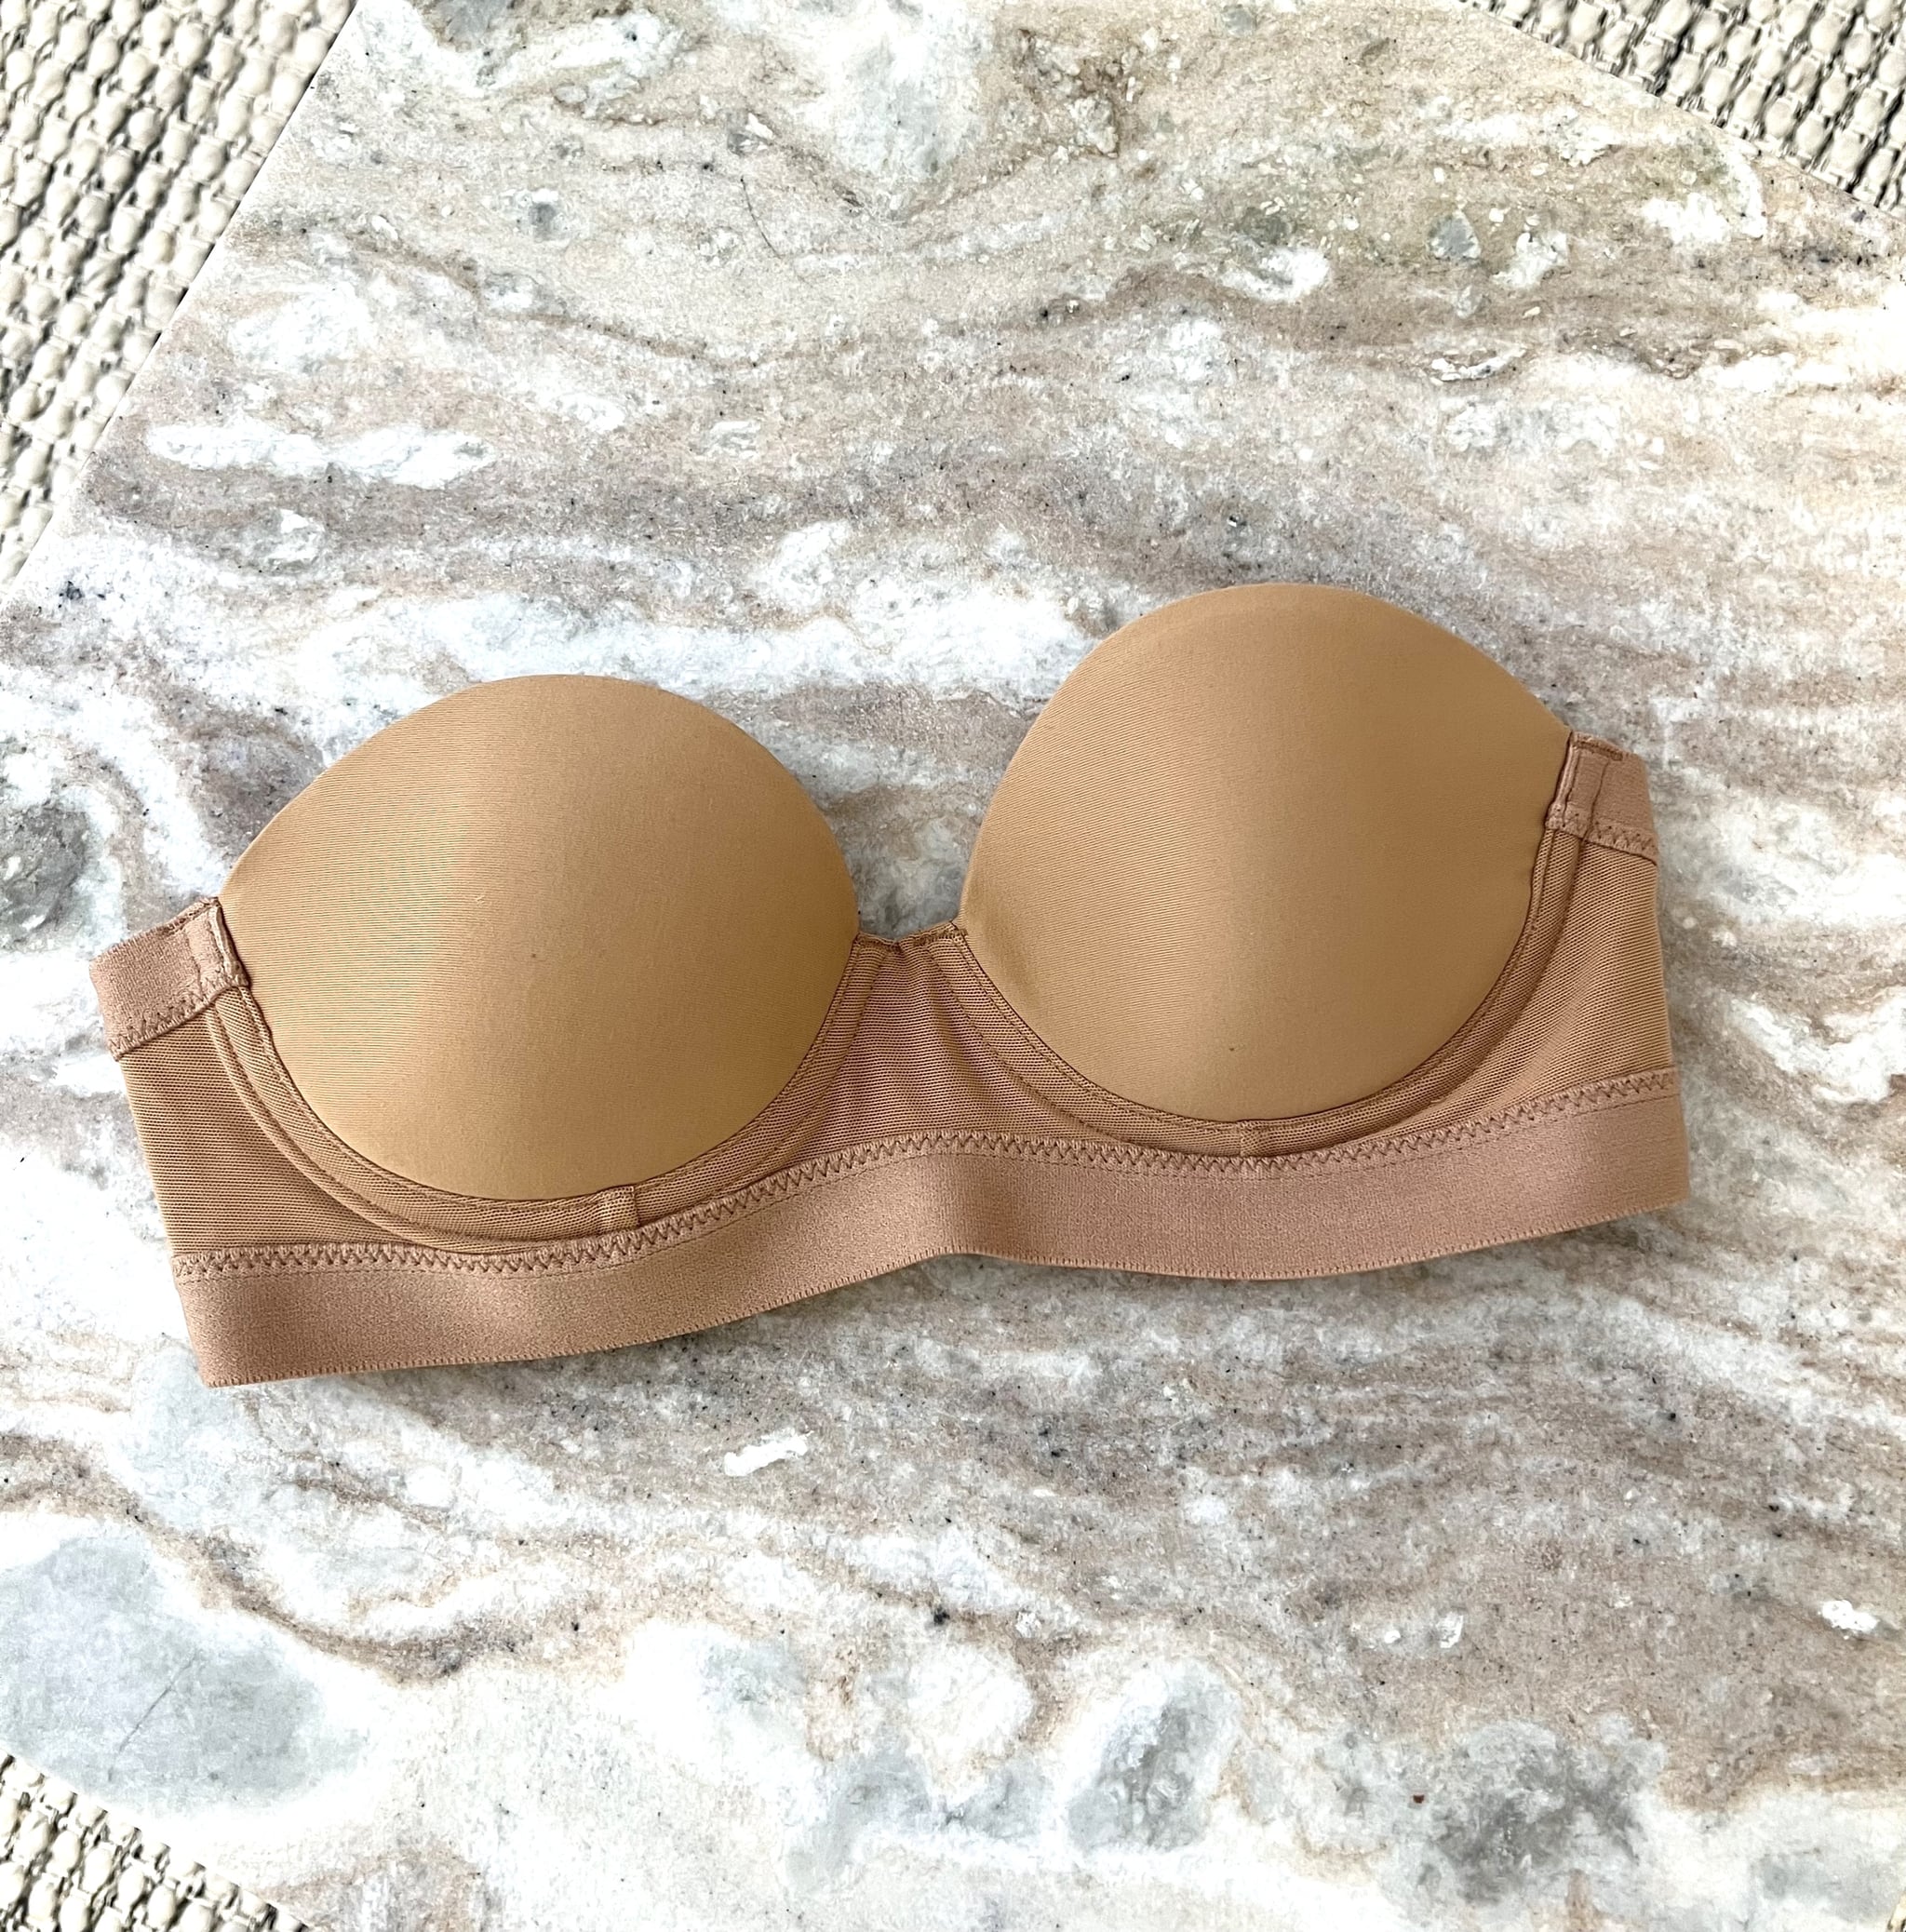 Pepper MVP Multiway Strapless Bra in Tuscan, I Found the Strapless Bra  I've Been Searching Over a Decade For